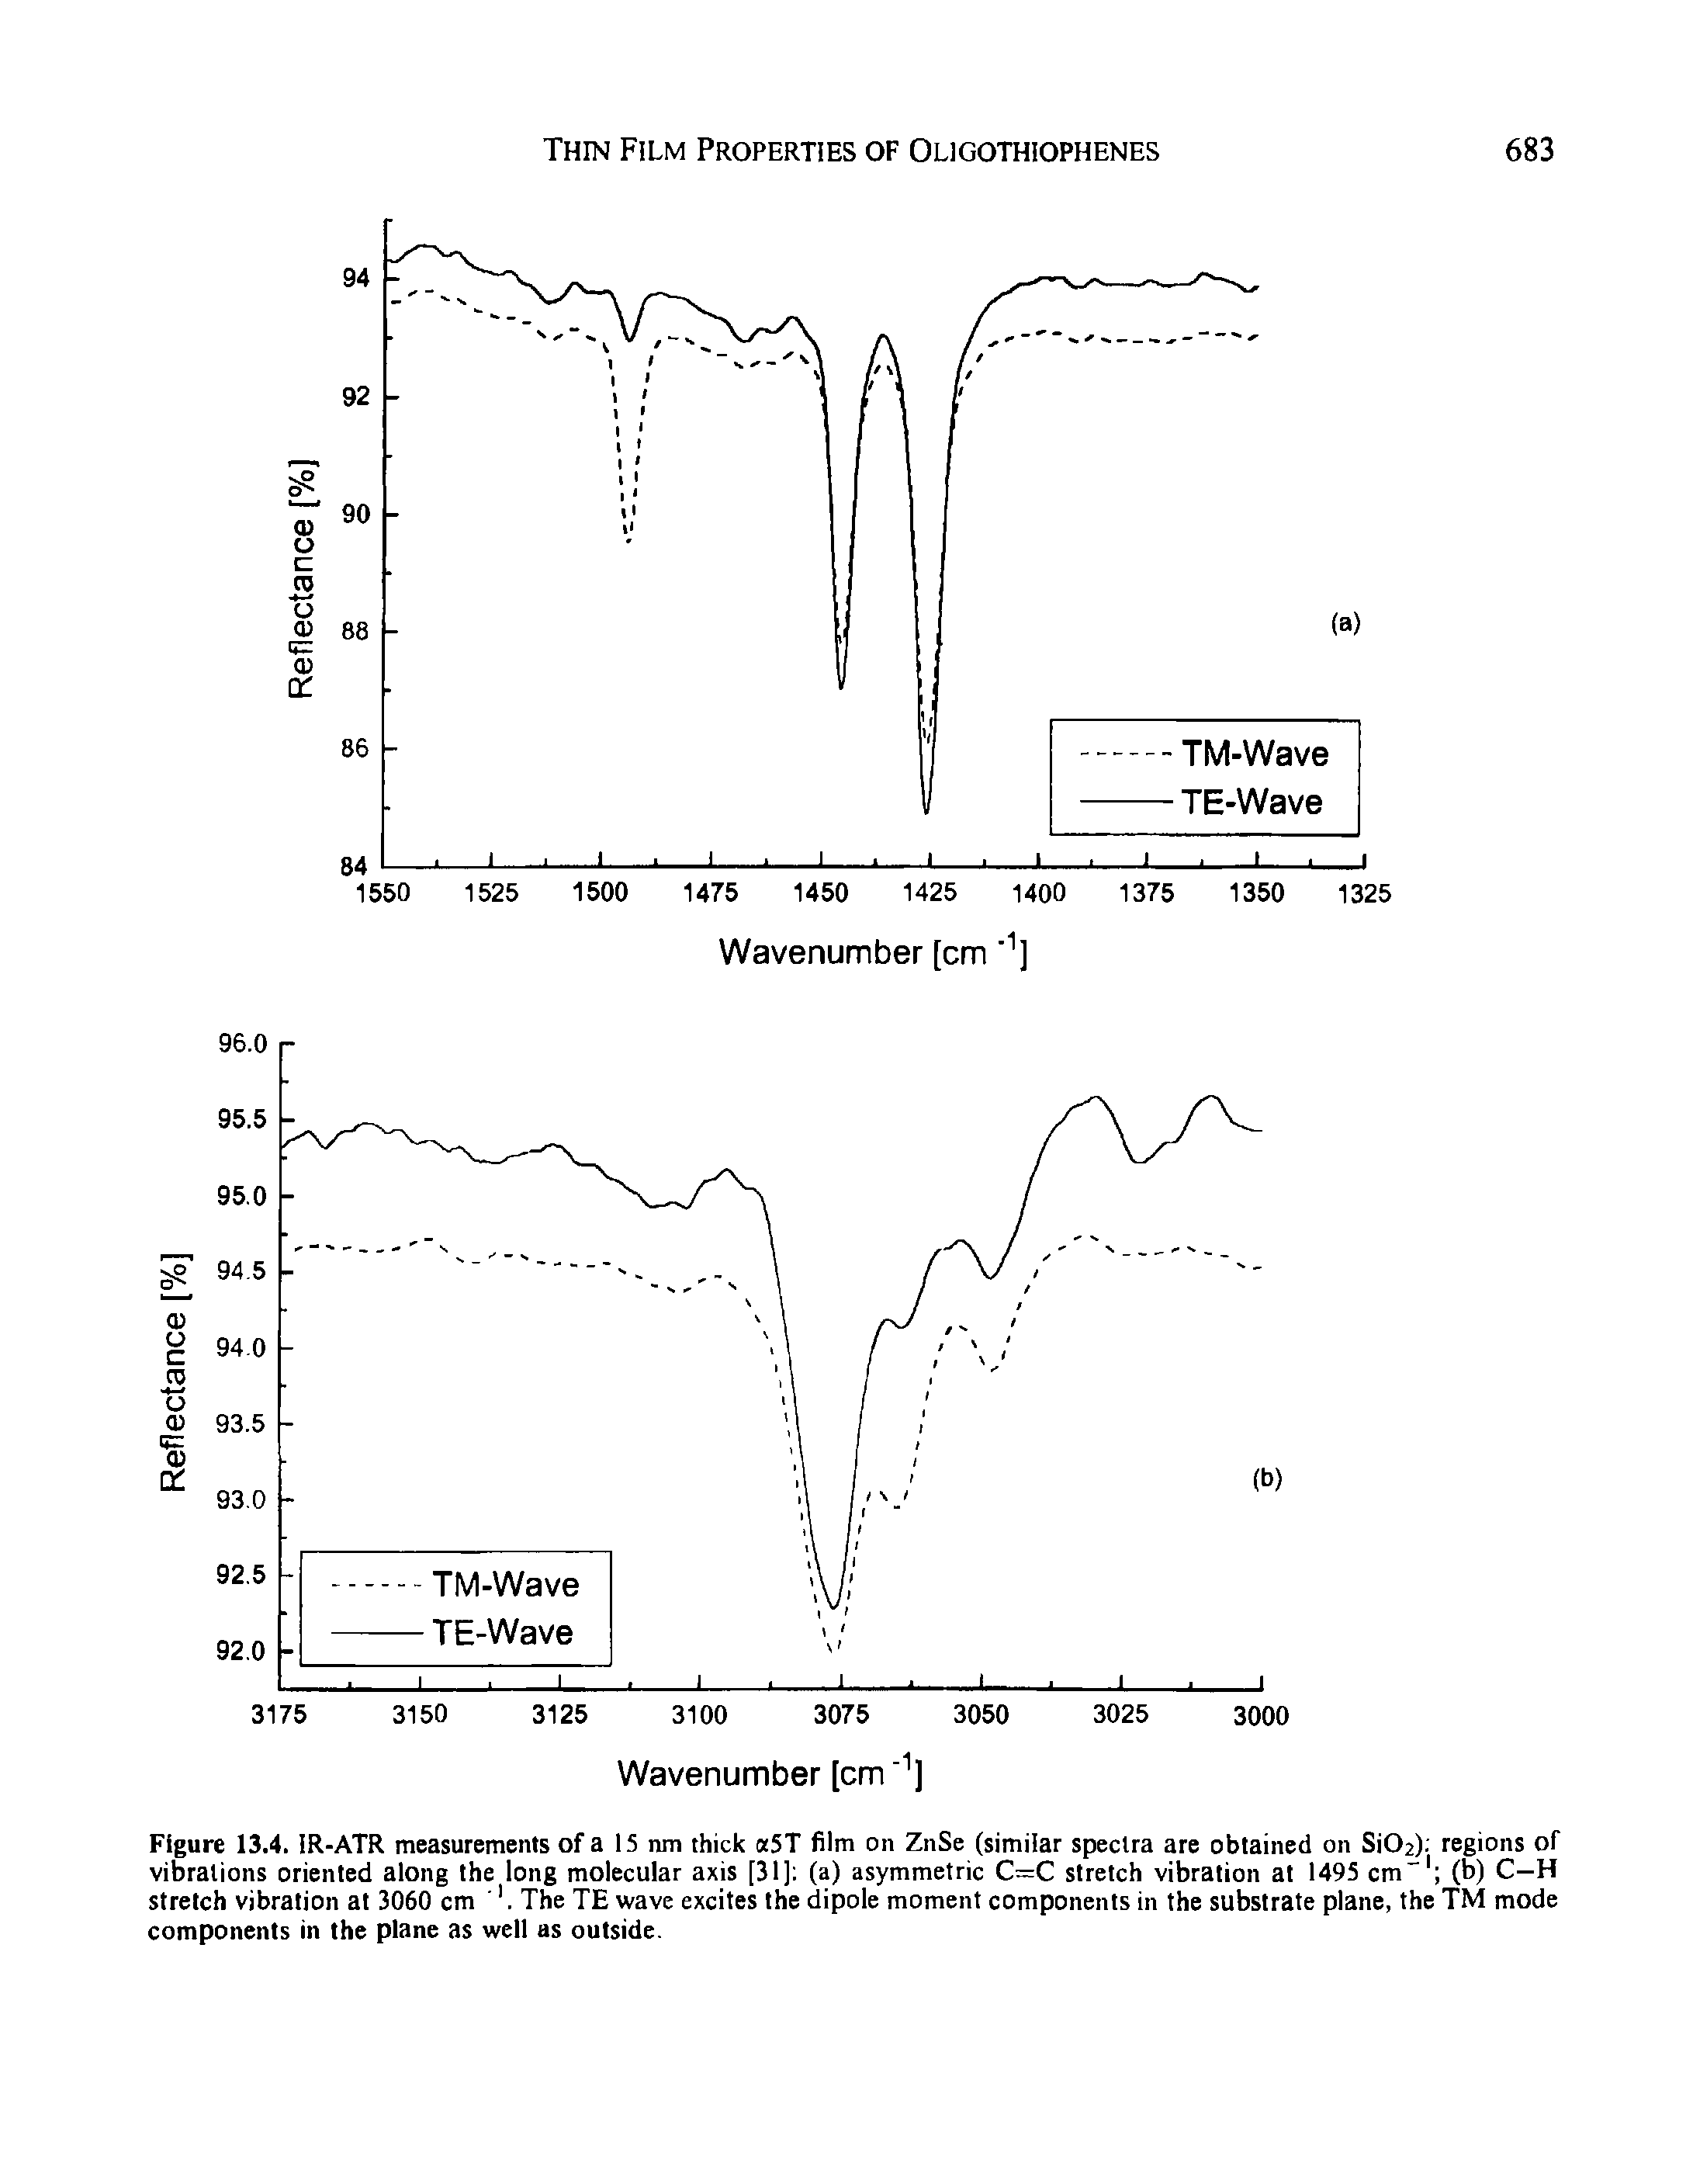 Figure 13.4. IR-ATR measurements of a 15 nm thick 5T film on ZnSe (similar spectra are obtained on Si02) regions of vibrations oriented along the long molecular axis [31] (a) asymmetric C=C stretch vibration at 1495 cm" (b) C—H stretch vibration at 3060 cm The TE wave excites the dipole moment components in the substrate plane, the TM mode components in the plane as well as outside.